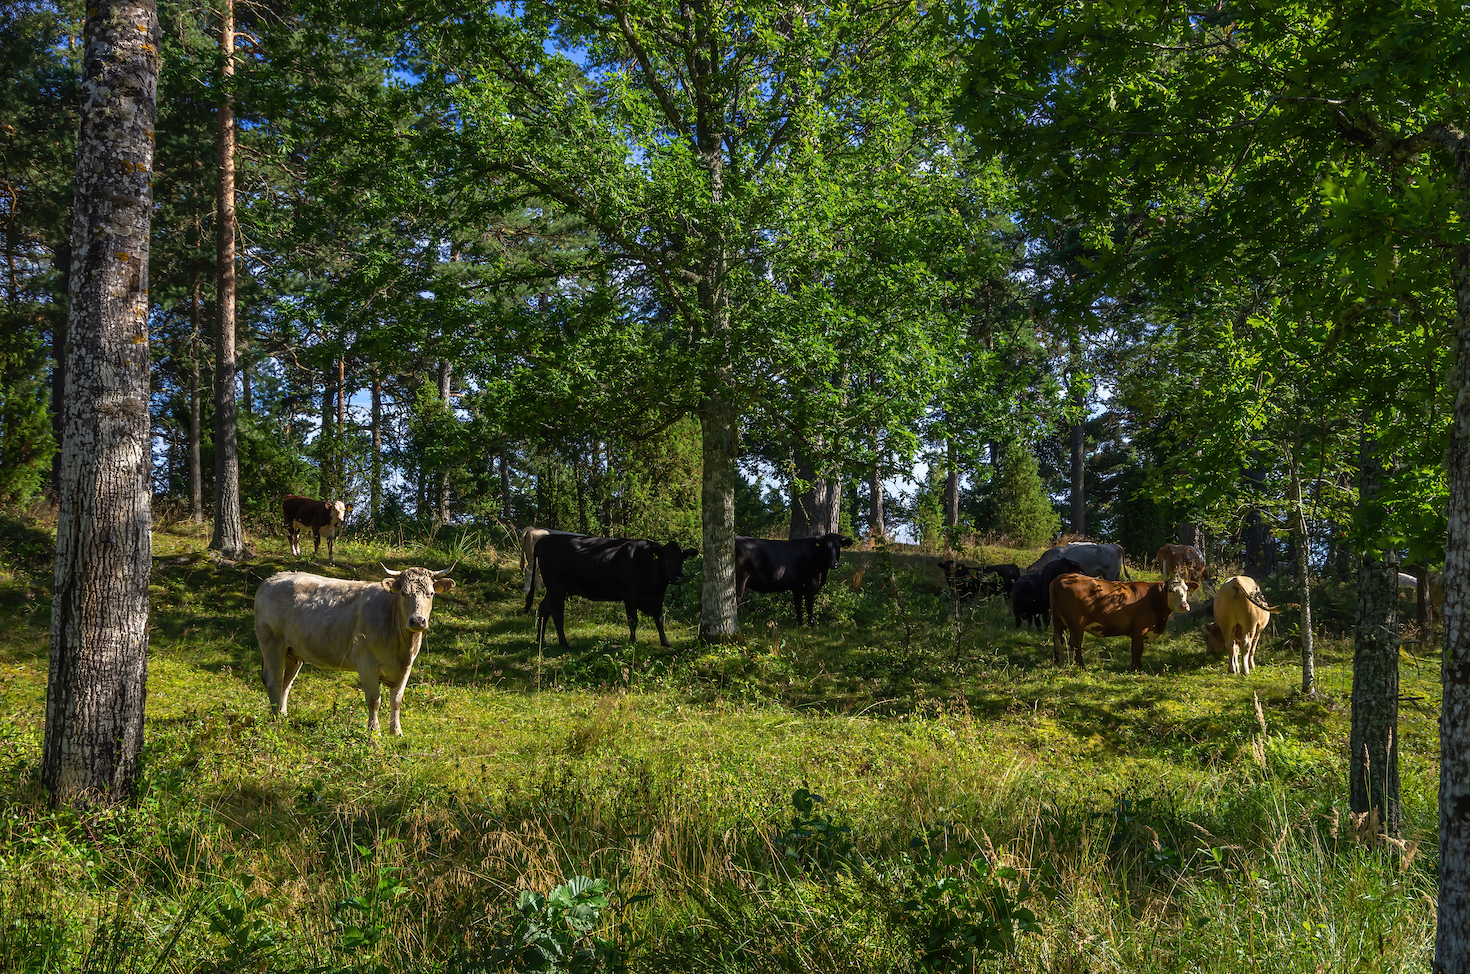 Agroforestry is the regenerative technique getting overlooked in the US